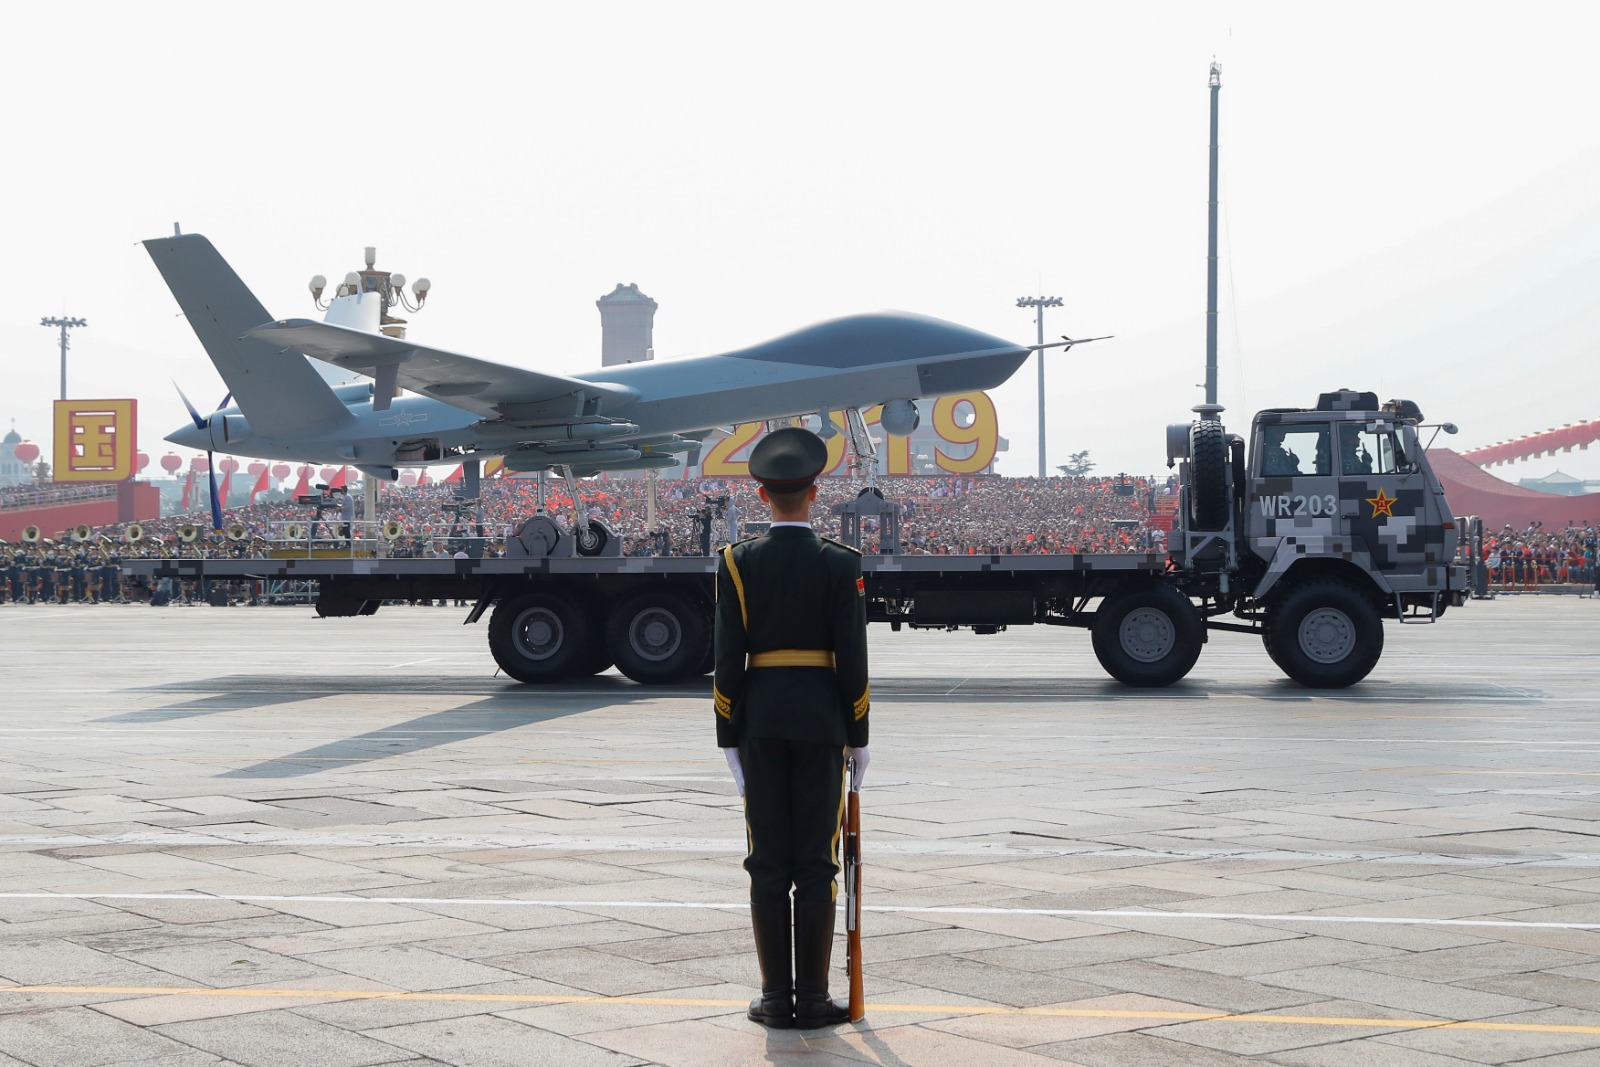 Stealth Fighters, Hypersonic Missiles and Aircraft Carriers: China's Military Has Arrived - The National Interest Online